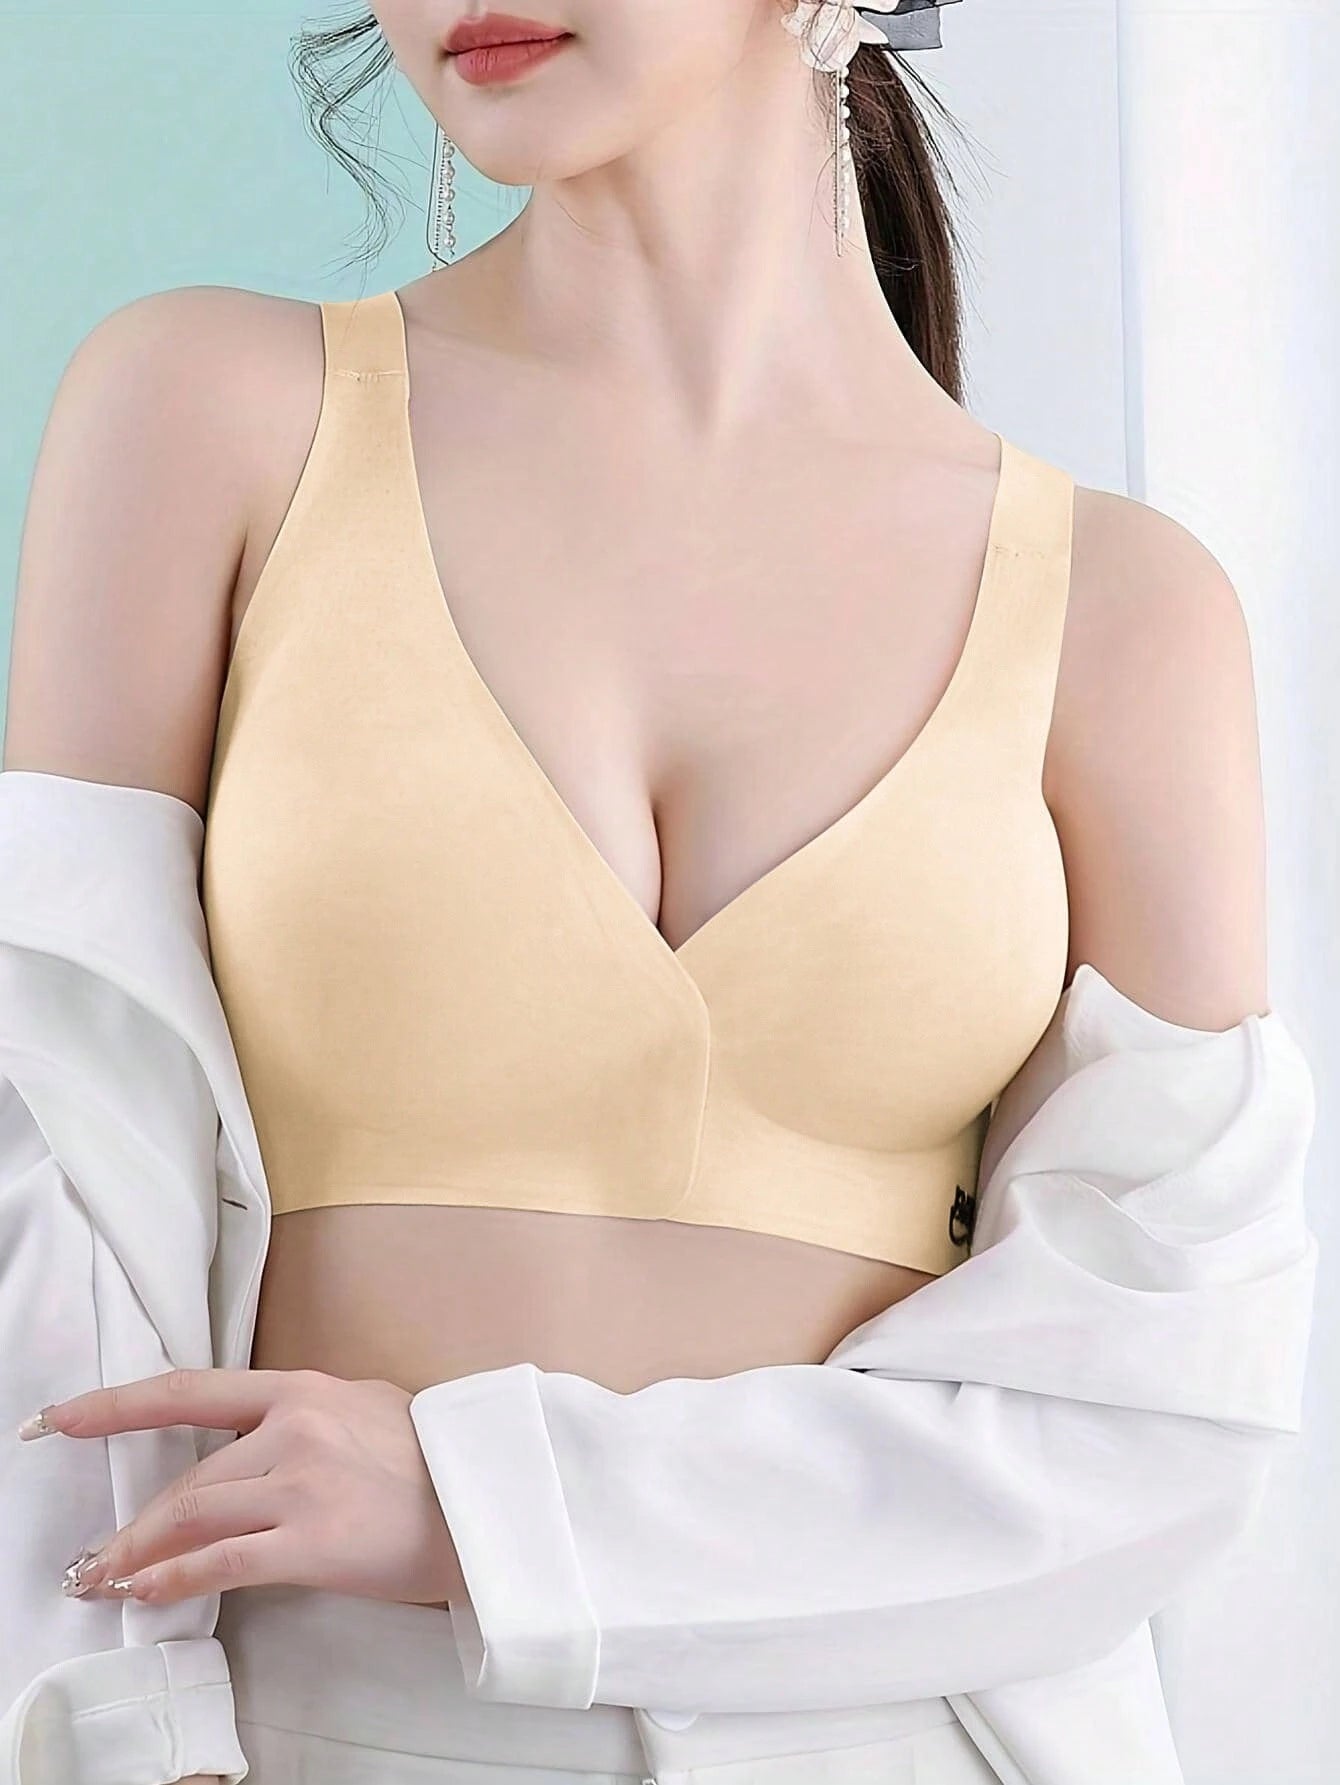 Seamless Bra For Women That Lift, Shape, And Provide Support With No Wires, 3-row Hook-and-eye Closure For Comfortable Fit Cornsilk